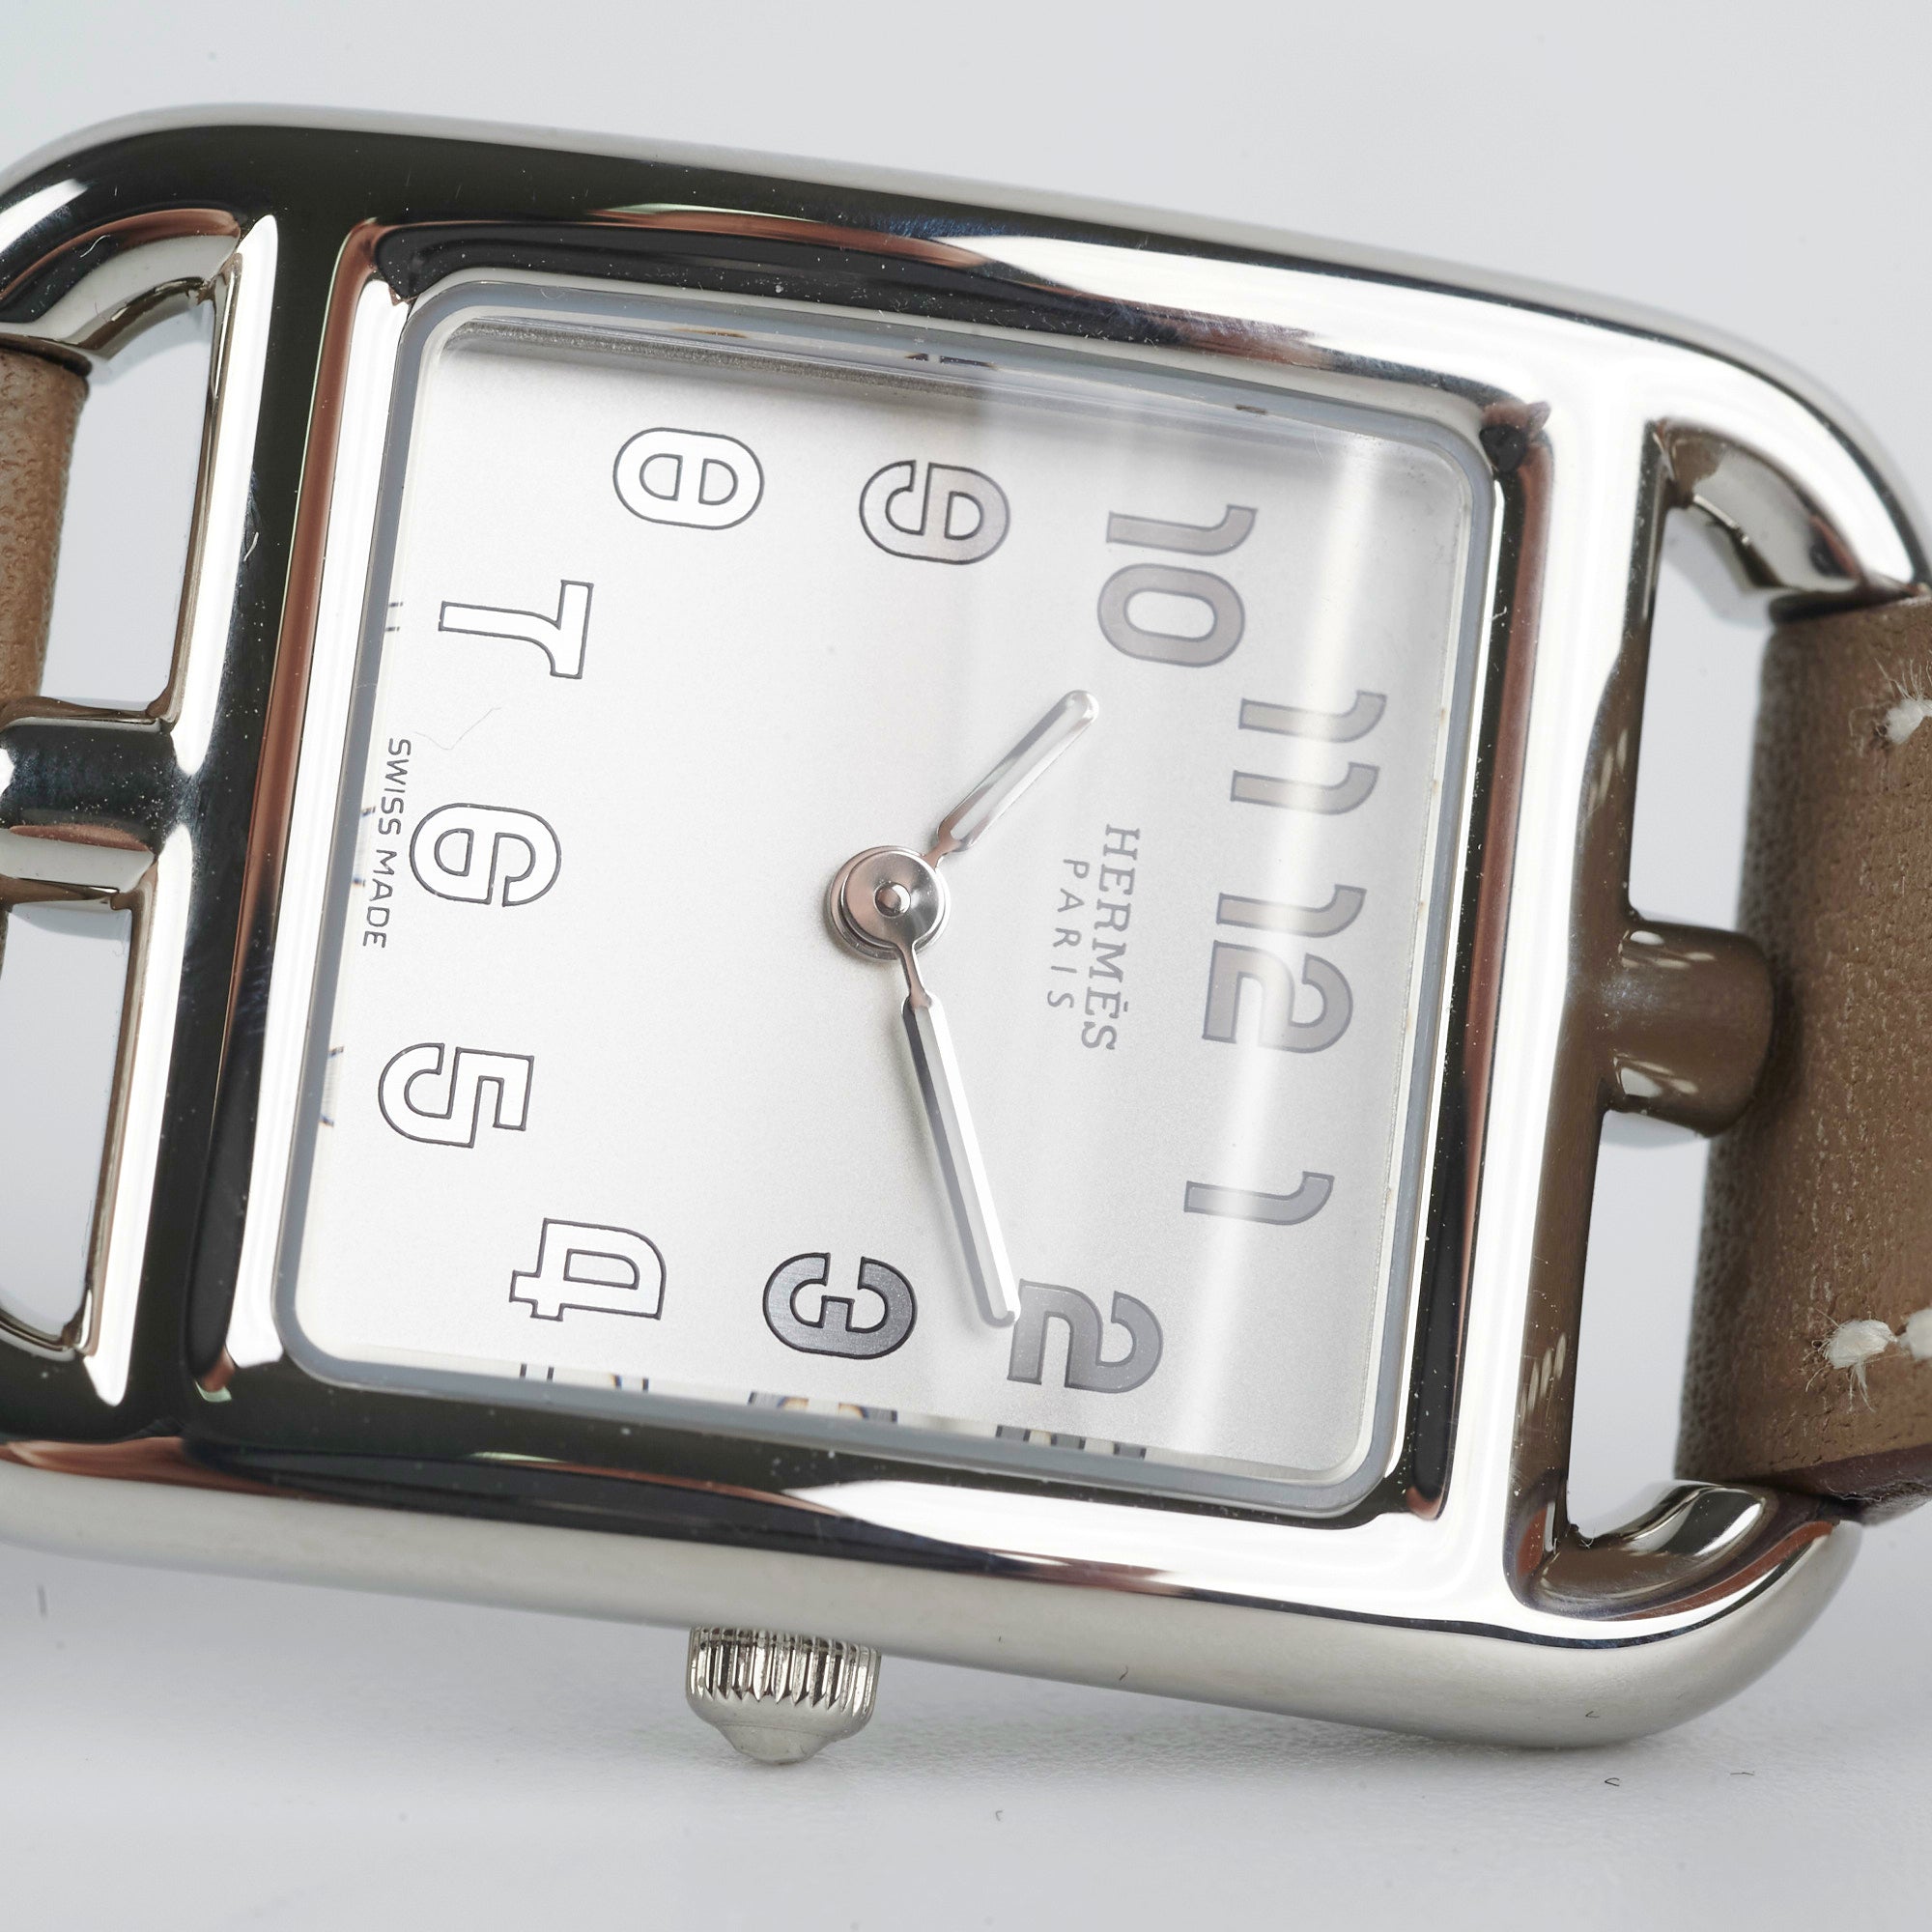 Cape Cod 37mm Stainless Steel & Leather Strap Watch